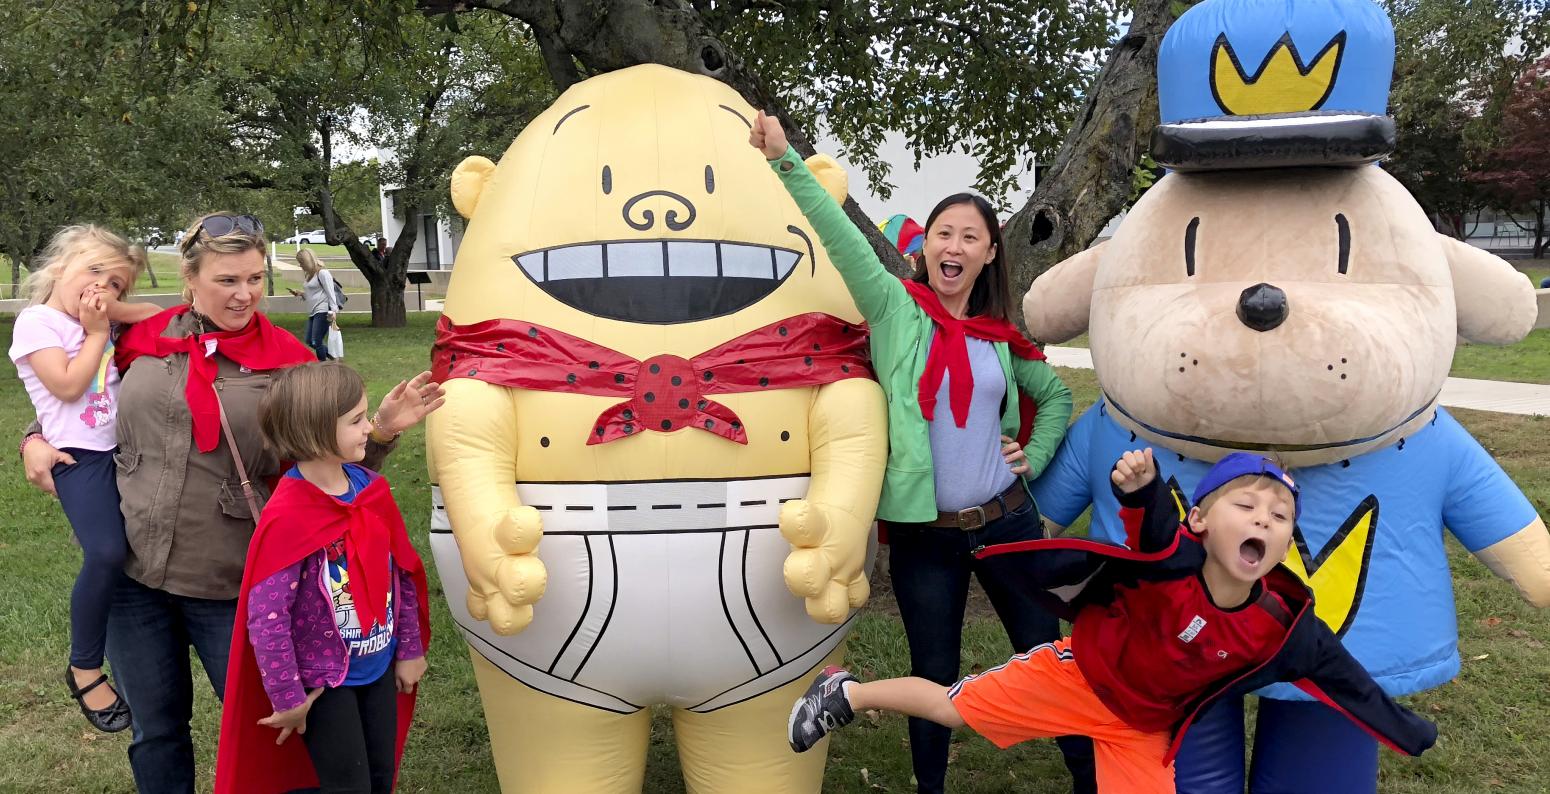 Visitors posing for group photo with Captain Underpants and Dog Man at an event..